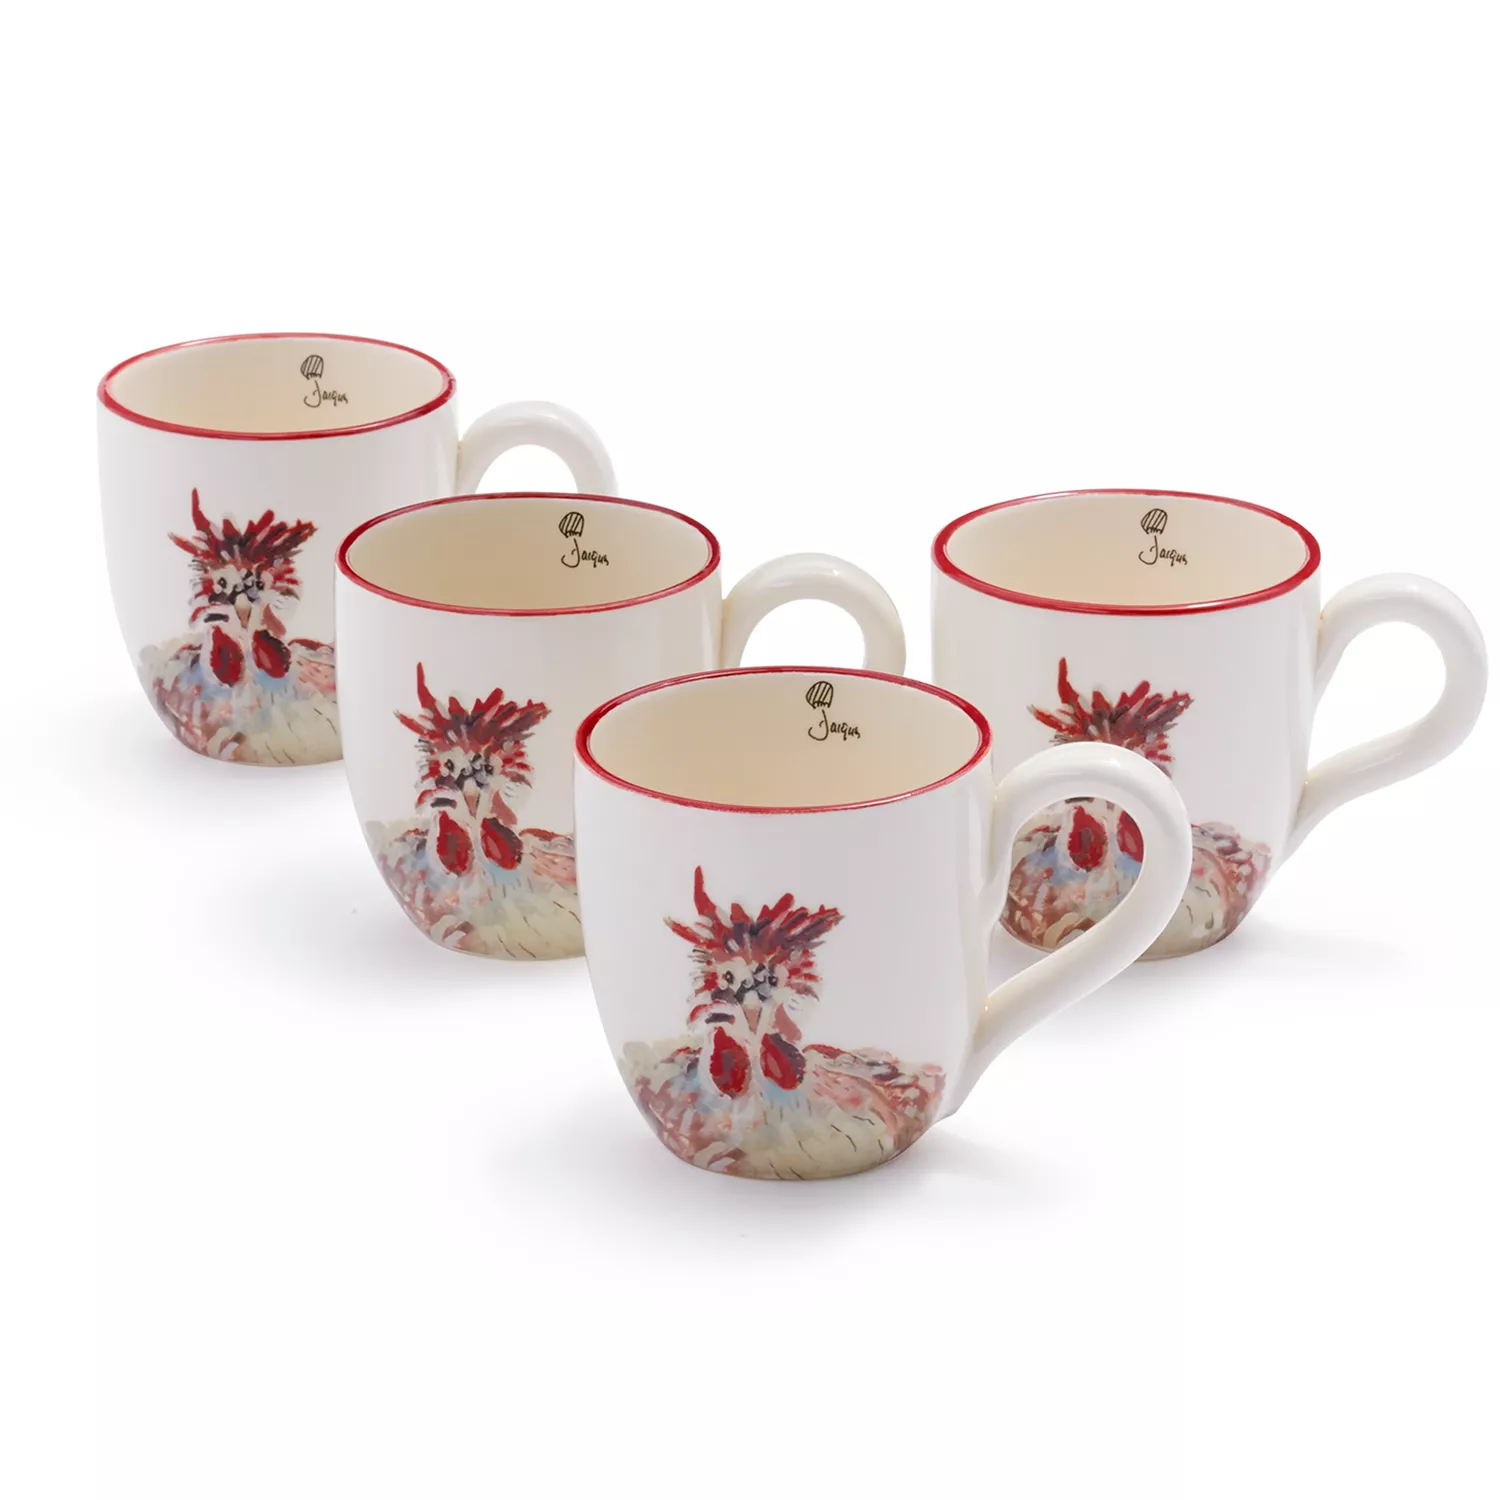 Sur La Table Jacques P&#233;pin Collection Chicken Mugs, Set of 4